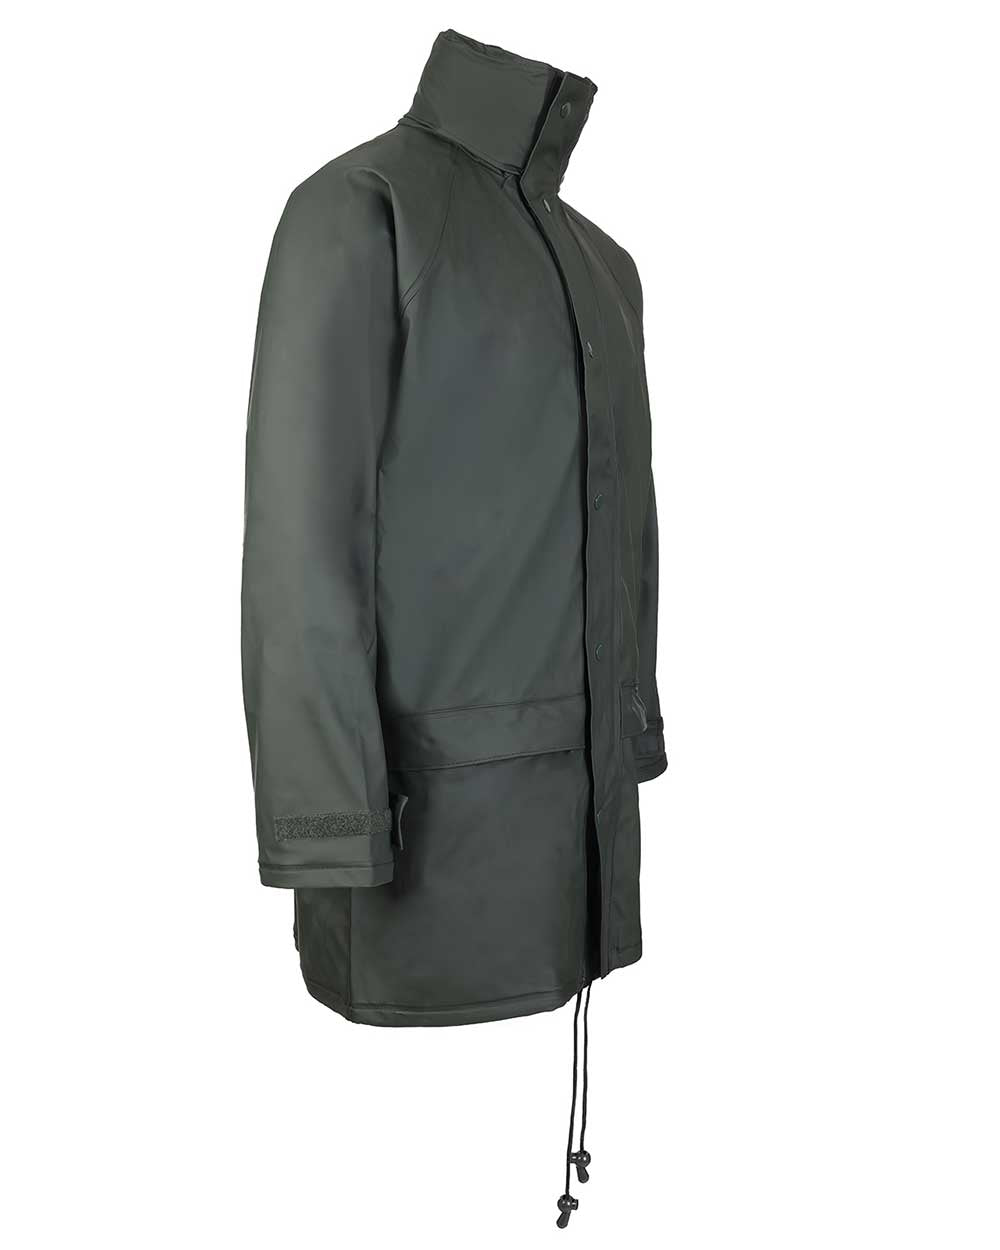 Green Coloured Fort Flex Jacket On A White Background 